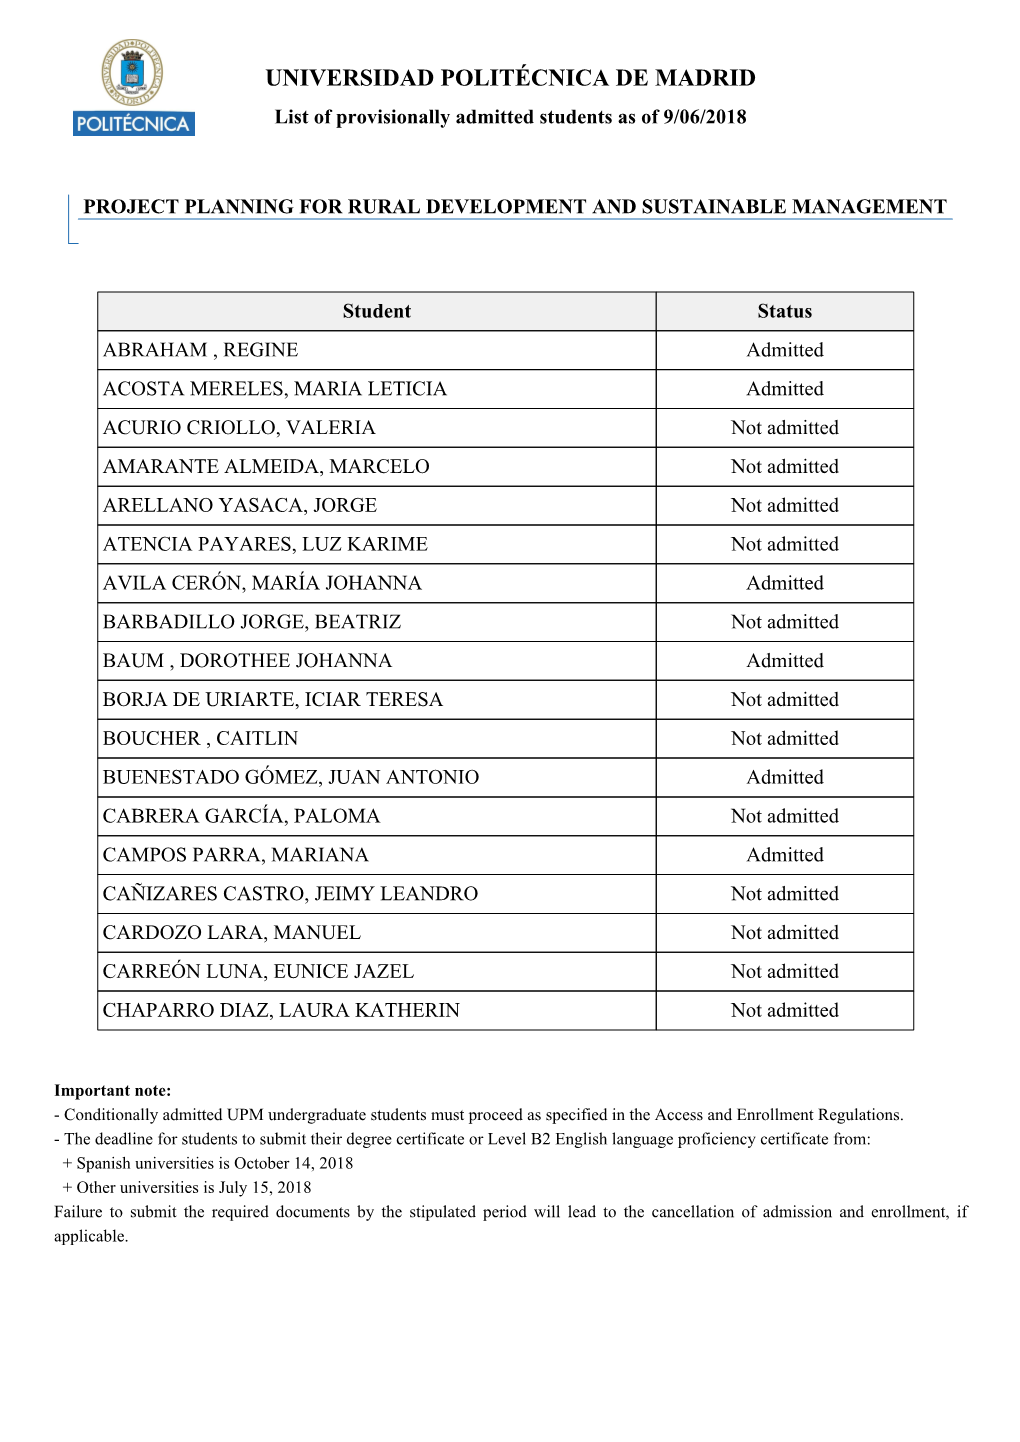 UNIVERSIDAD POLITÉCNICA DE MADRID List of Provisionally Admitted Students As of 9/06/2018